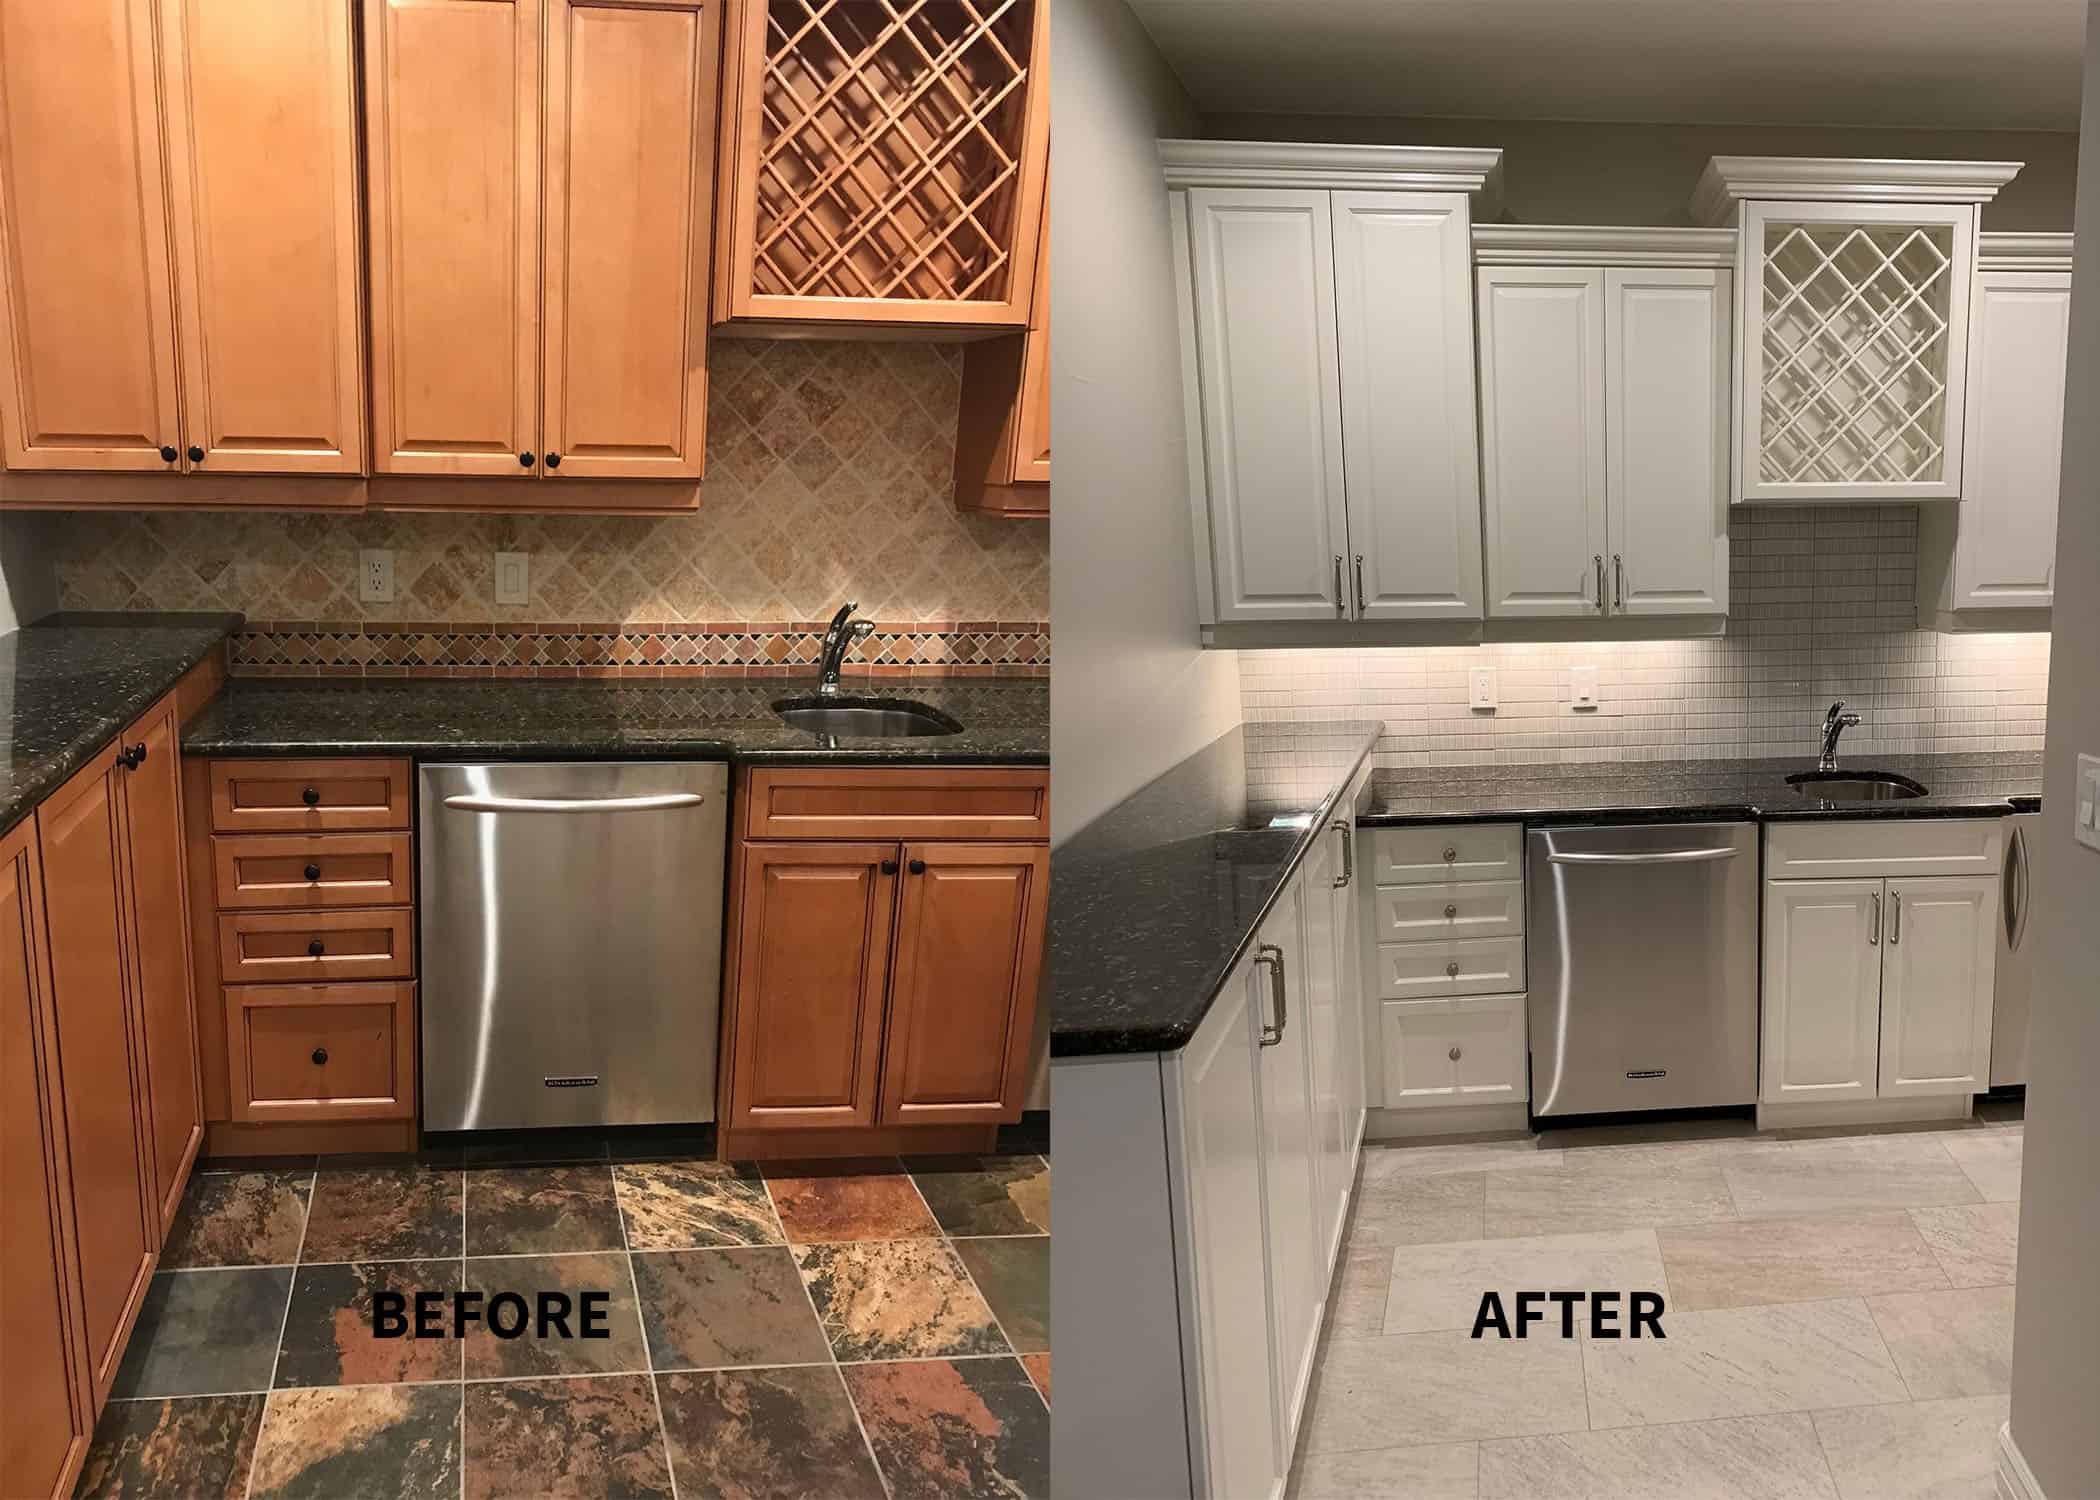 Paint kitchen cabinets compare: before light oak cabinets and after bright white